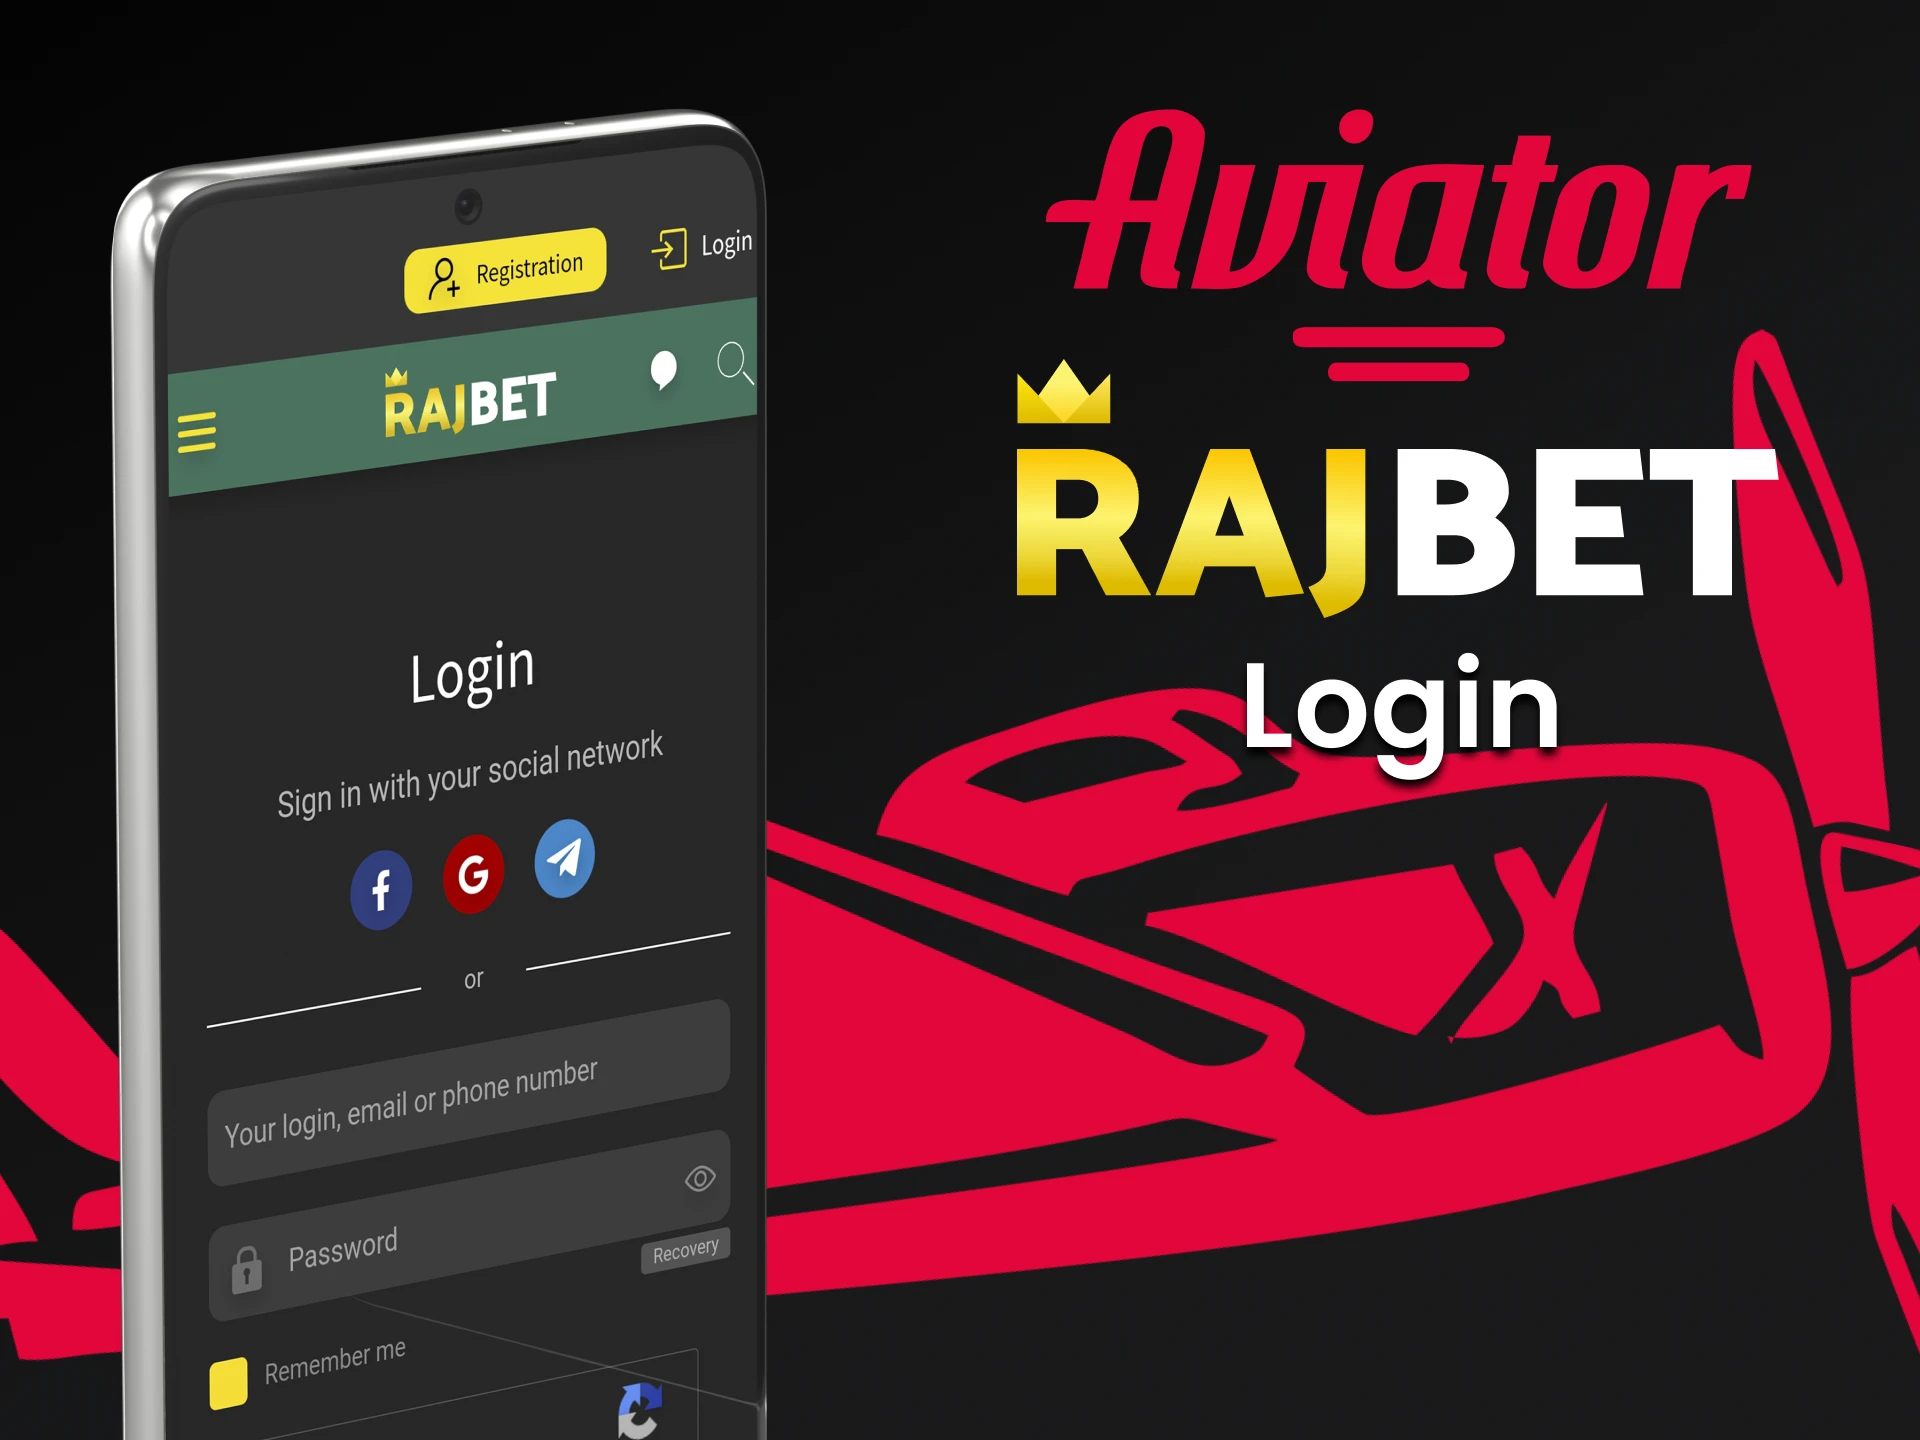 Log in to your personal account through the Rajbet application to play Aviator.